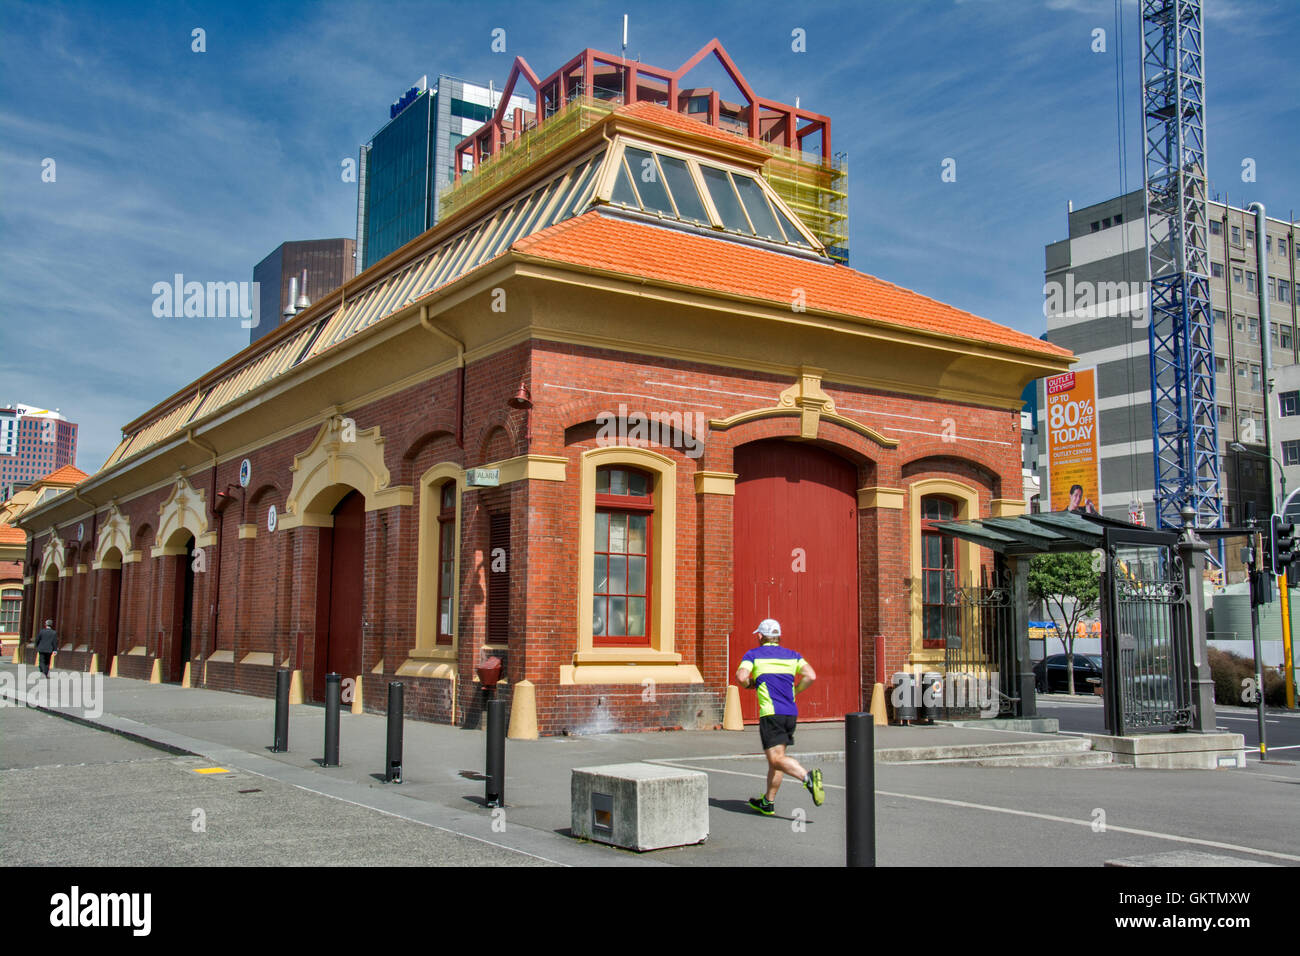 Wellington, New Zealand - March 3, 2016: Classic old building located at Customhouse Quay in Wellington CBD Stock Photo